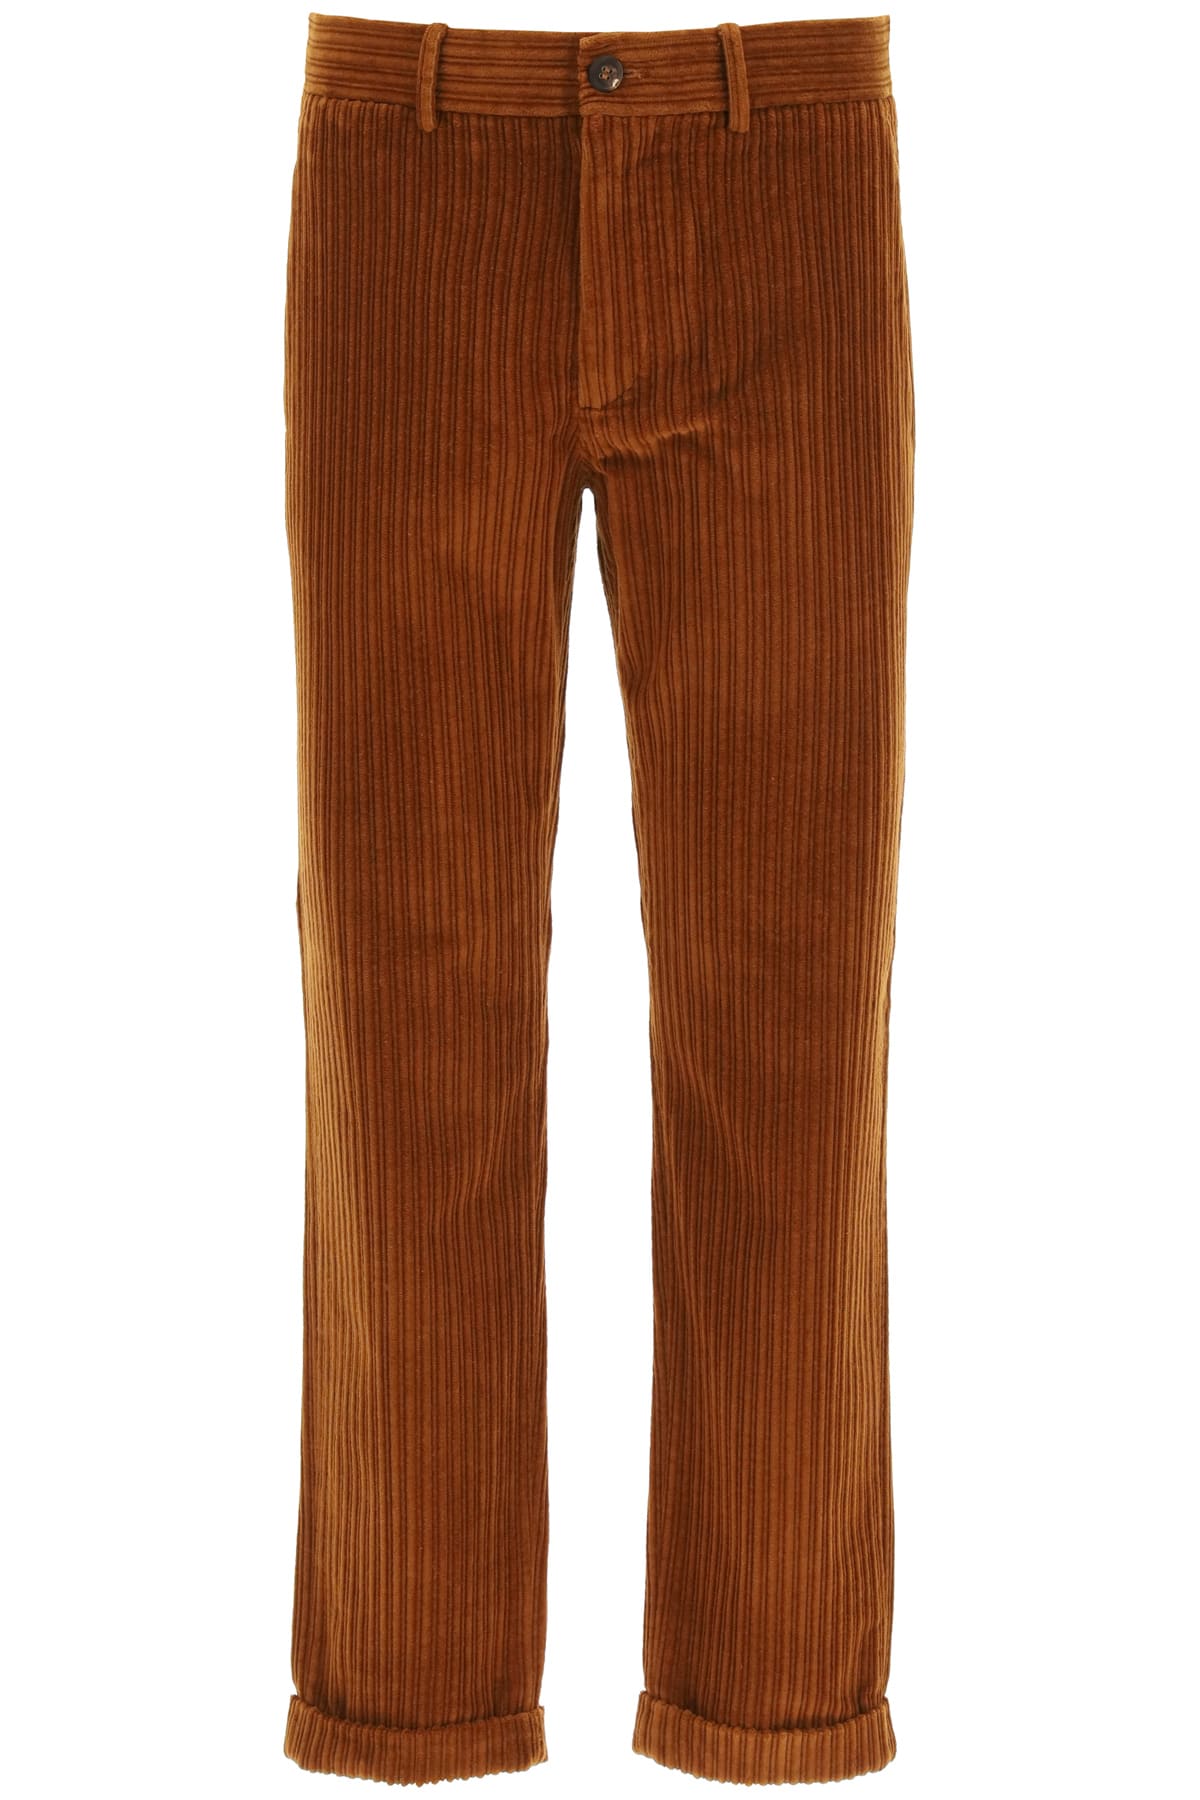 Golden Goose Conrad Chino Trousers In Corduroy